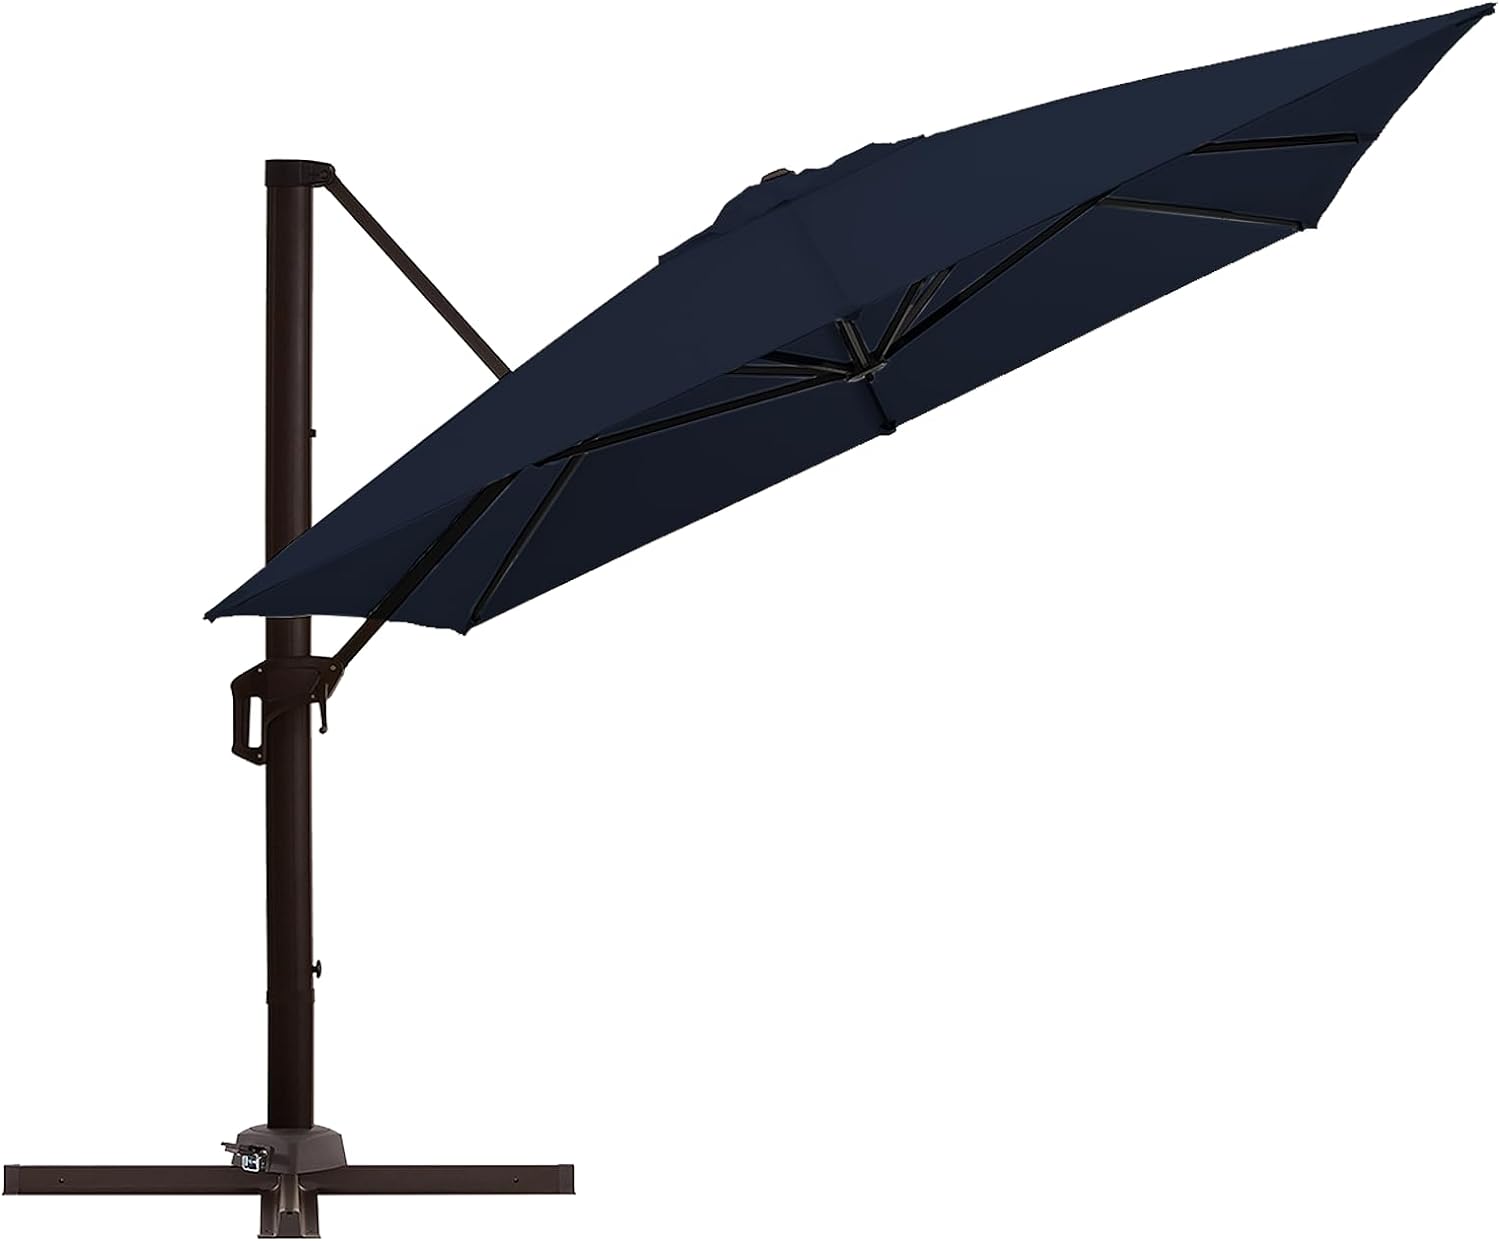 wikiwiki 10' X 13' Cantilever Patio Umbrella Outdoor Rectangle Large Offset Umbrella w/ 36 Month Fade Resistance Recycled Fabric, 6-Level 360Rotation Aluminum Pole for Deck Pool, Navy Blue